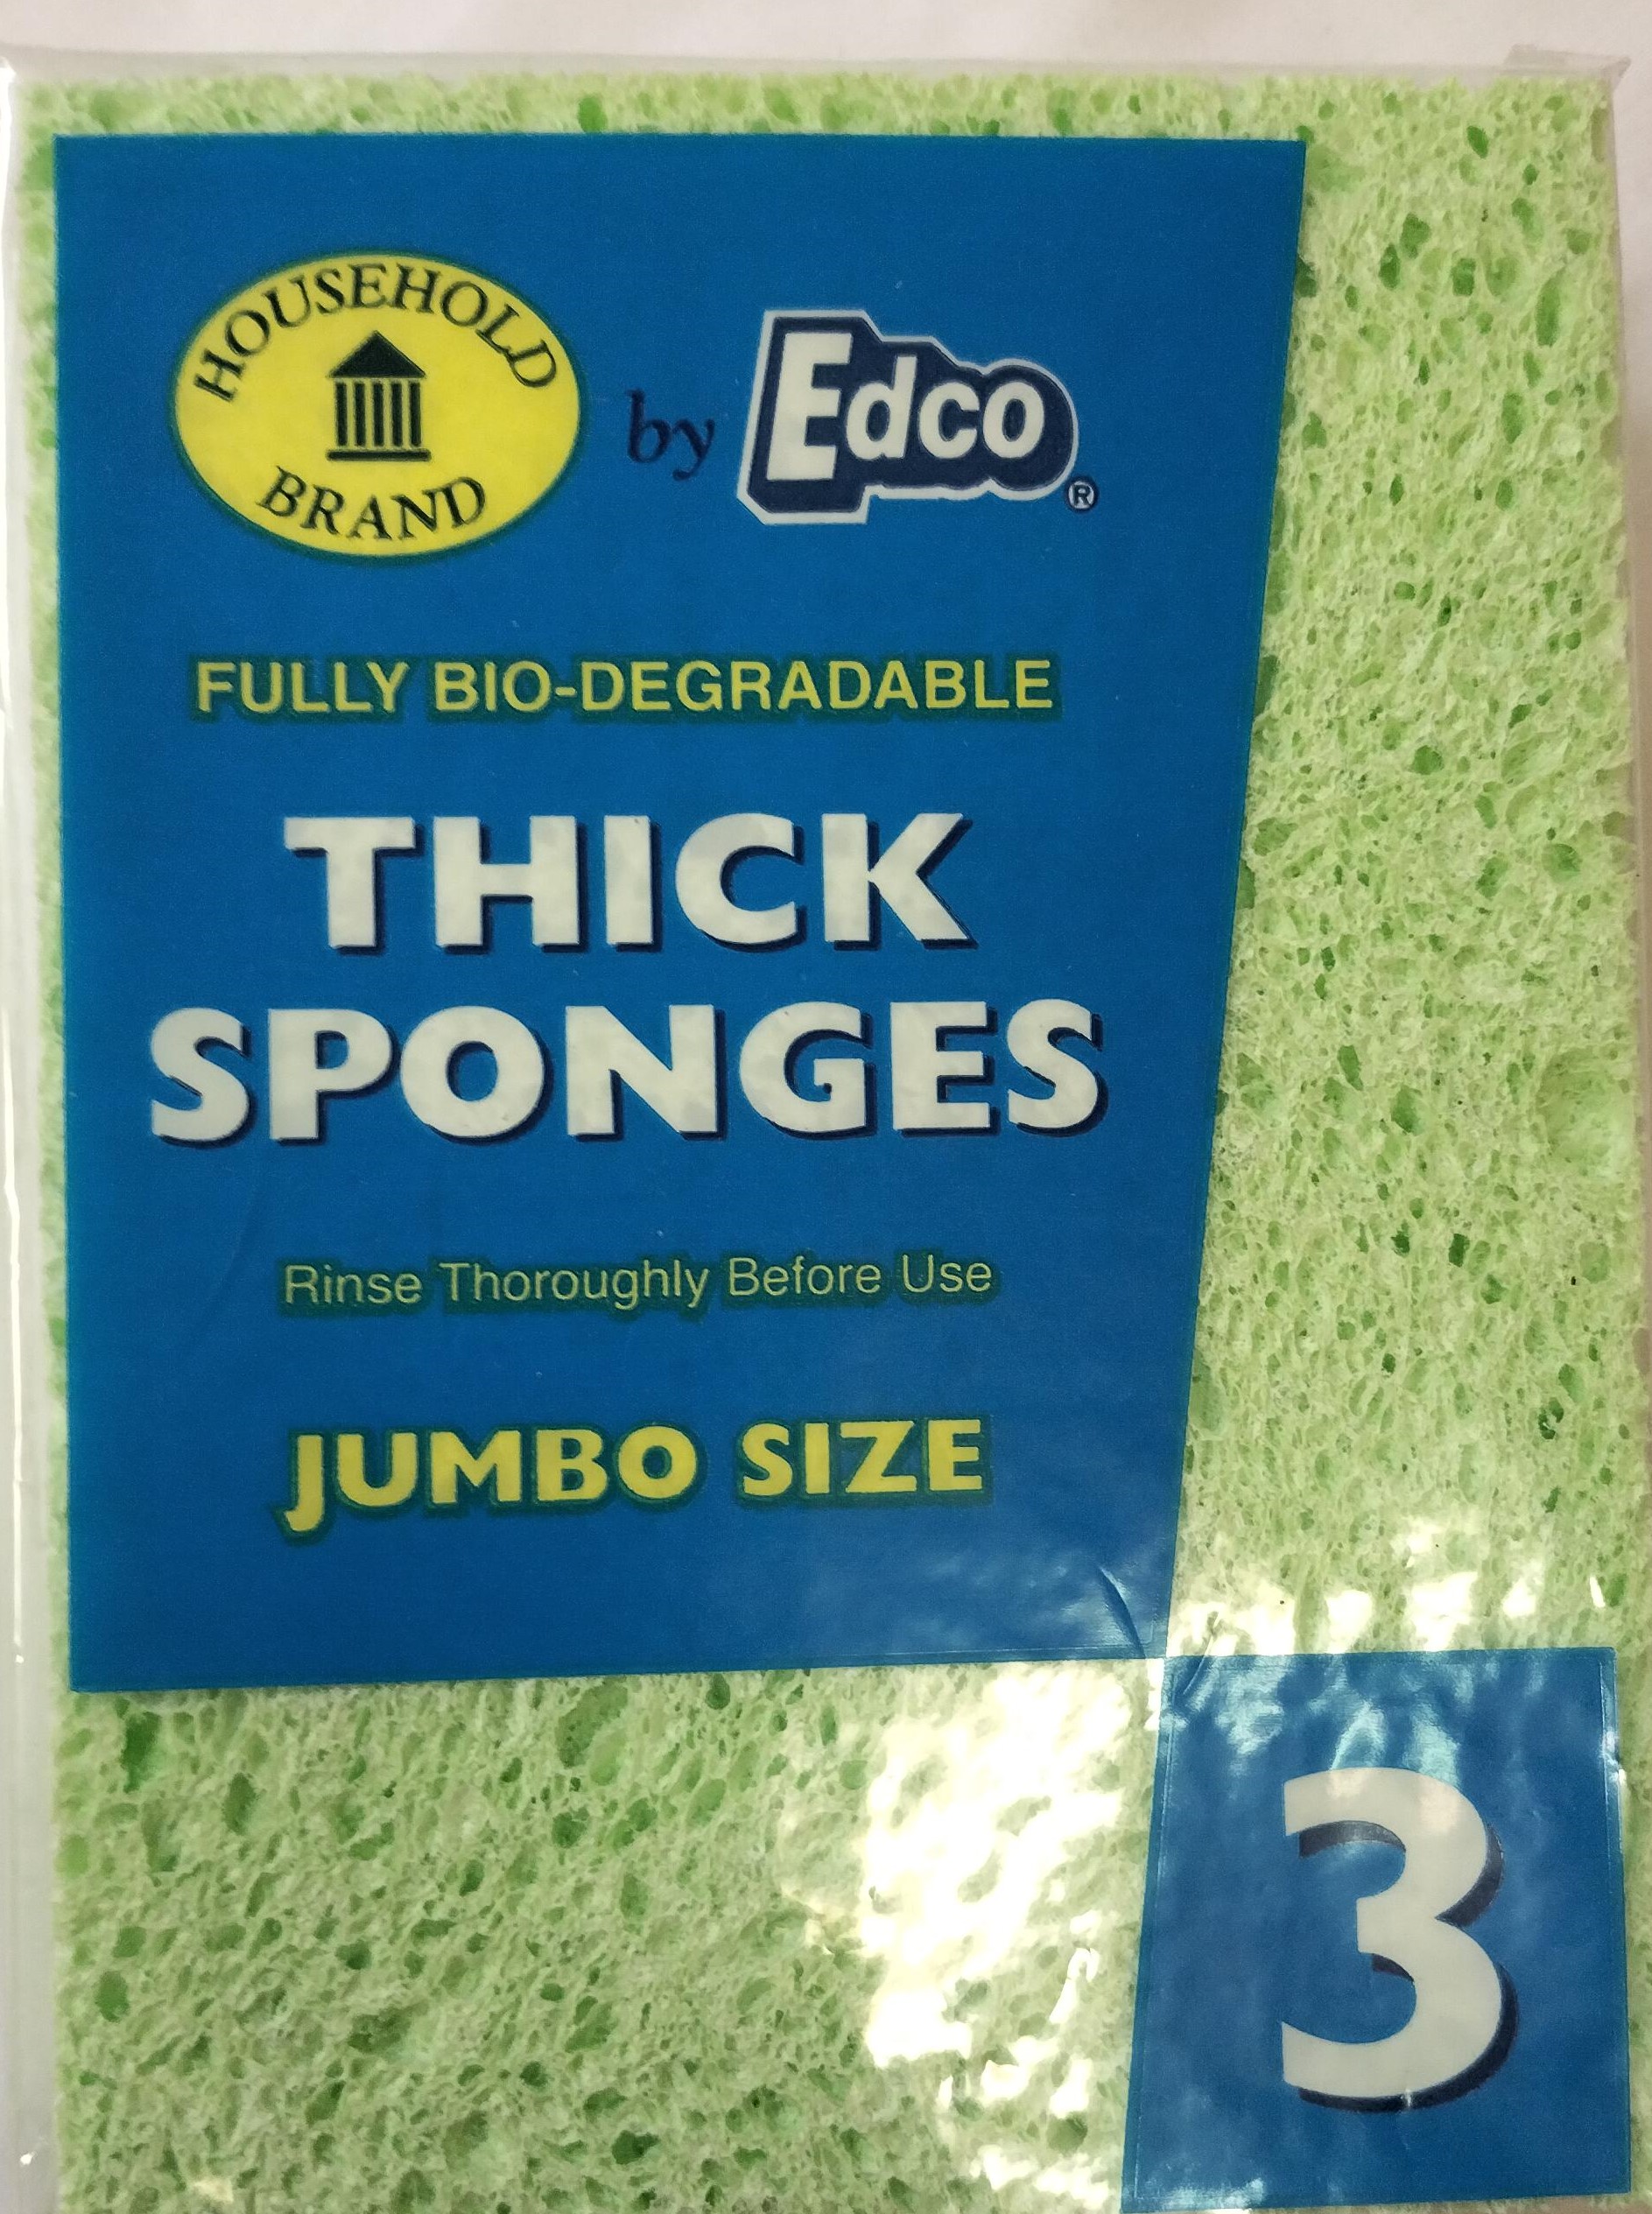 Edco Thick Sponges 160x120x13mm Pack of 3 Green